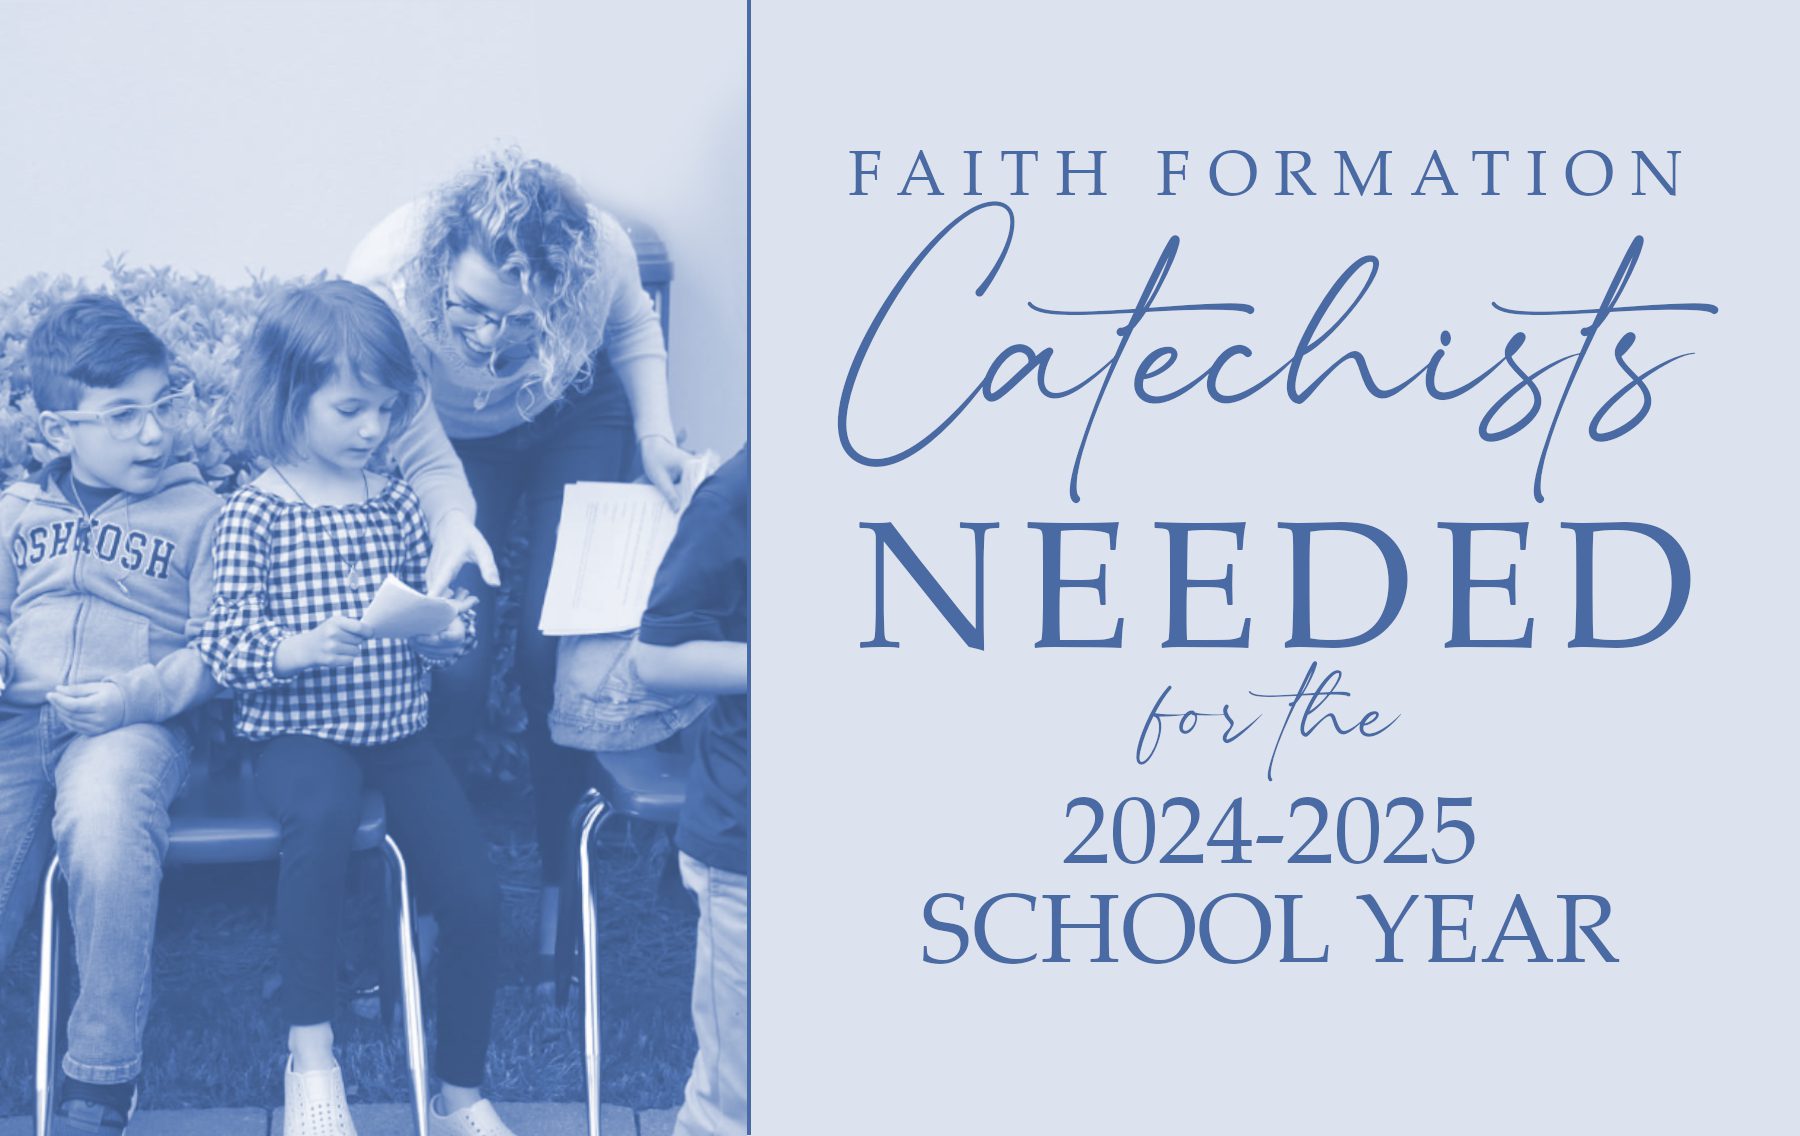 Catechists Needed